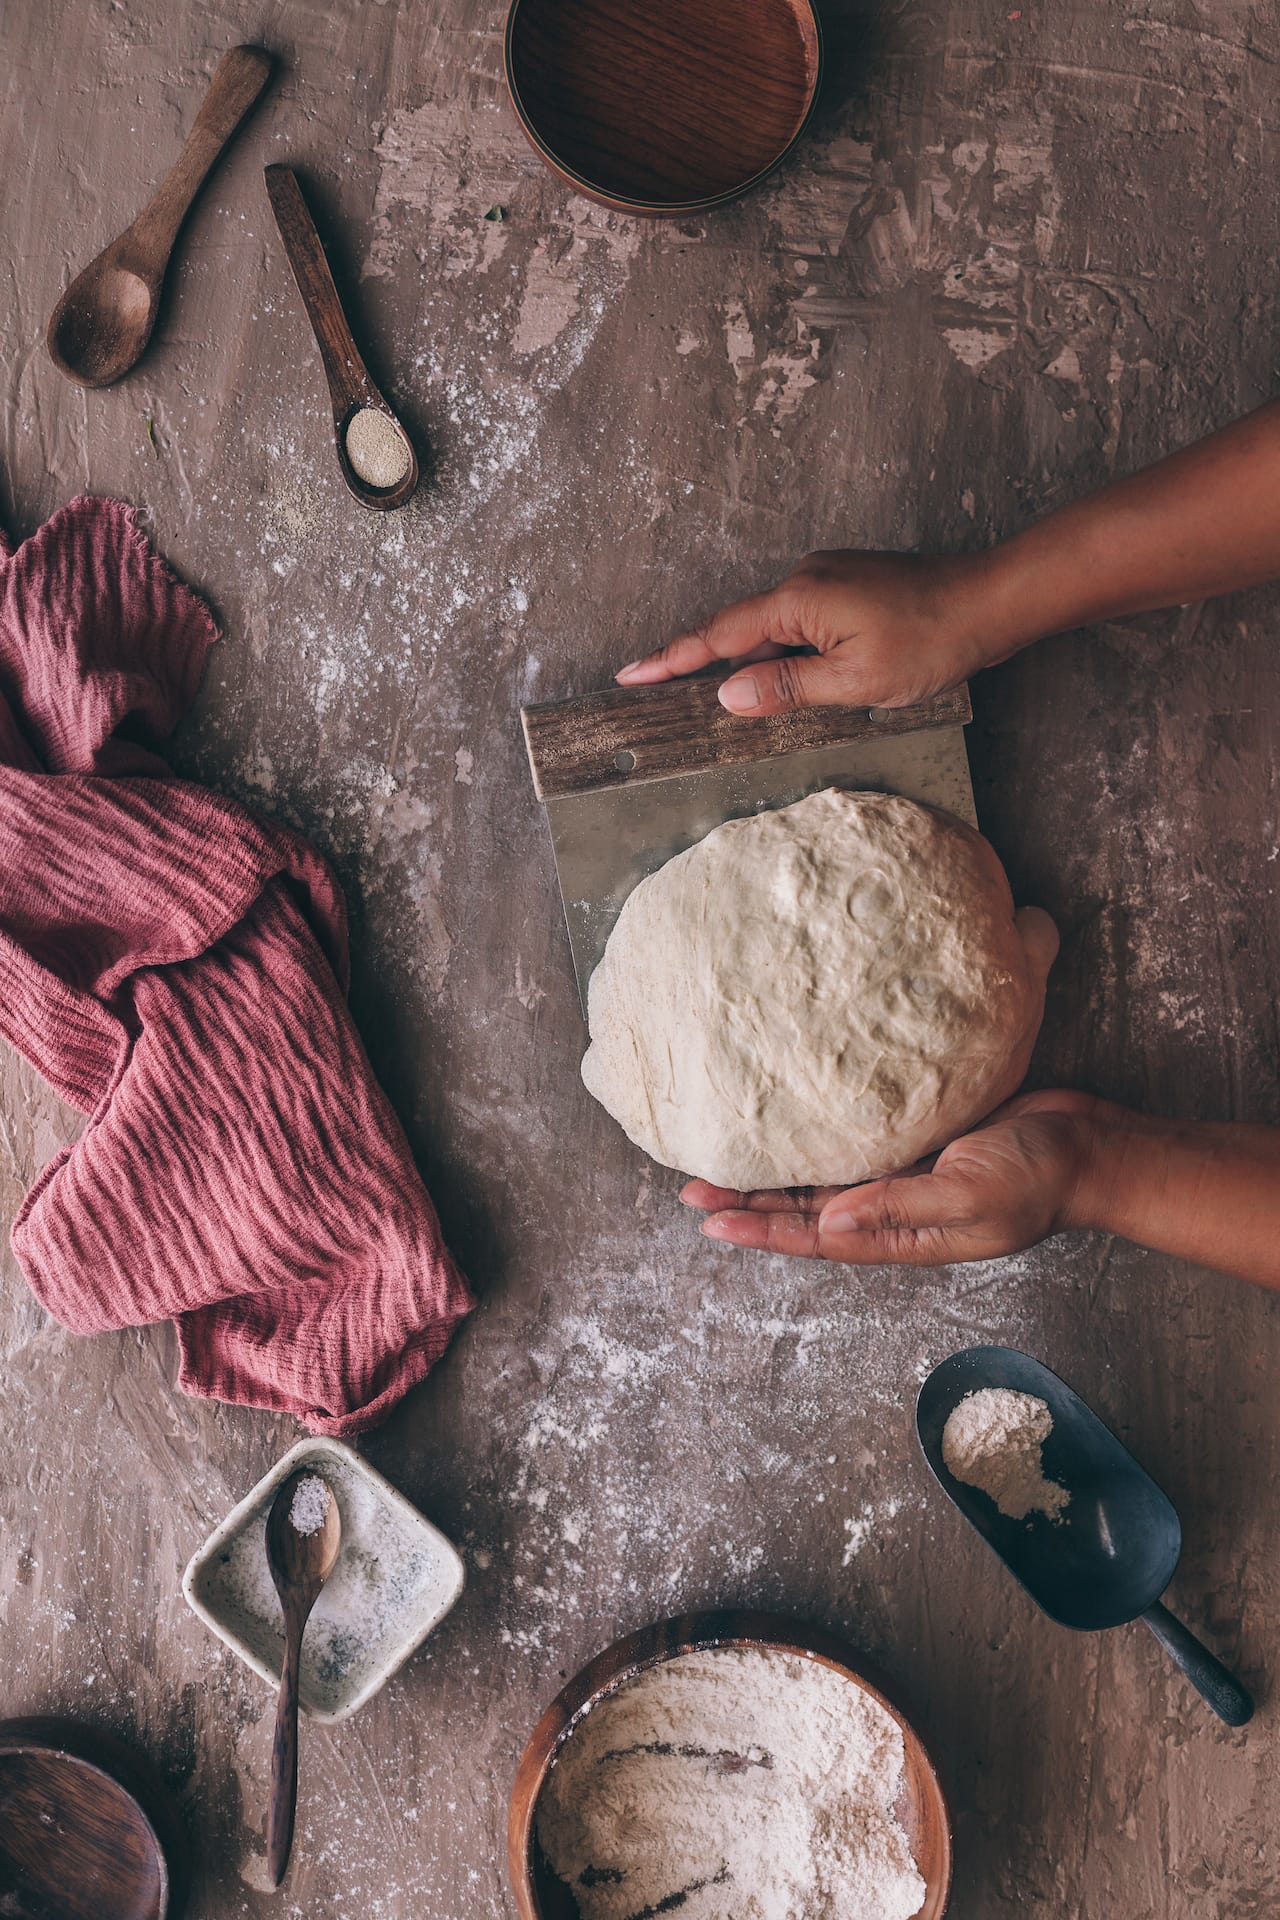 Shaping the Bread before baking